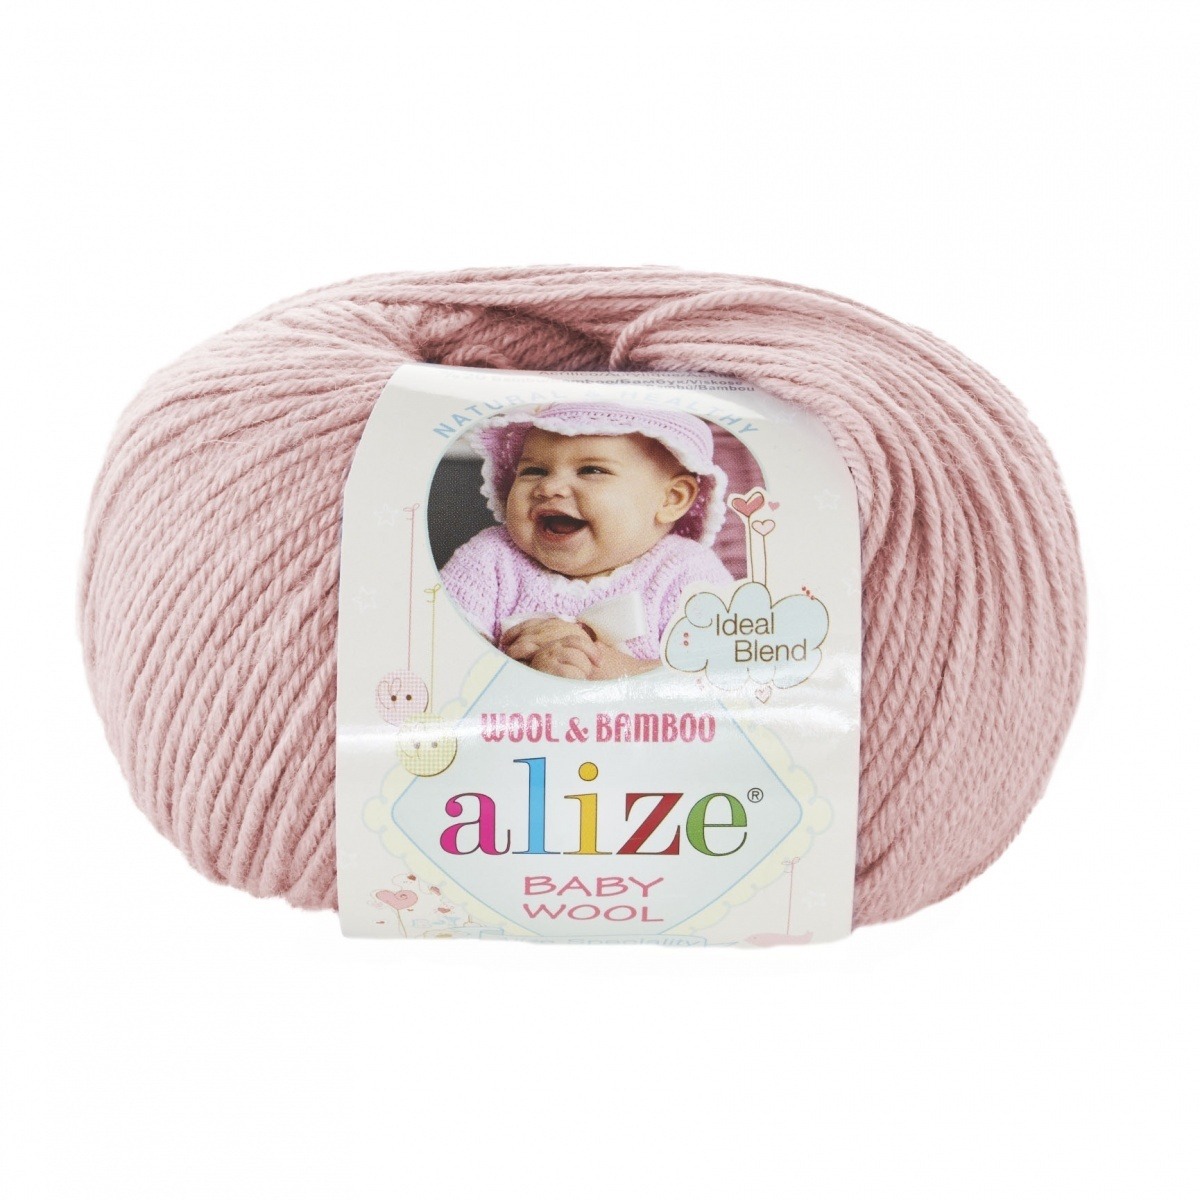 Alize "Baby wool" (161)